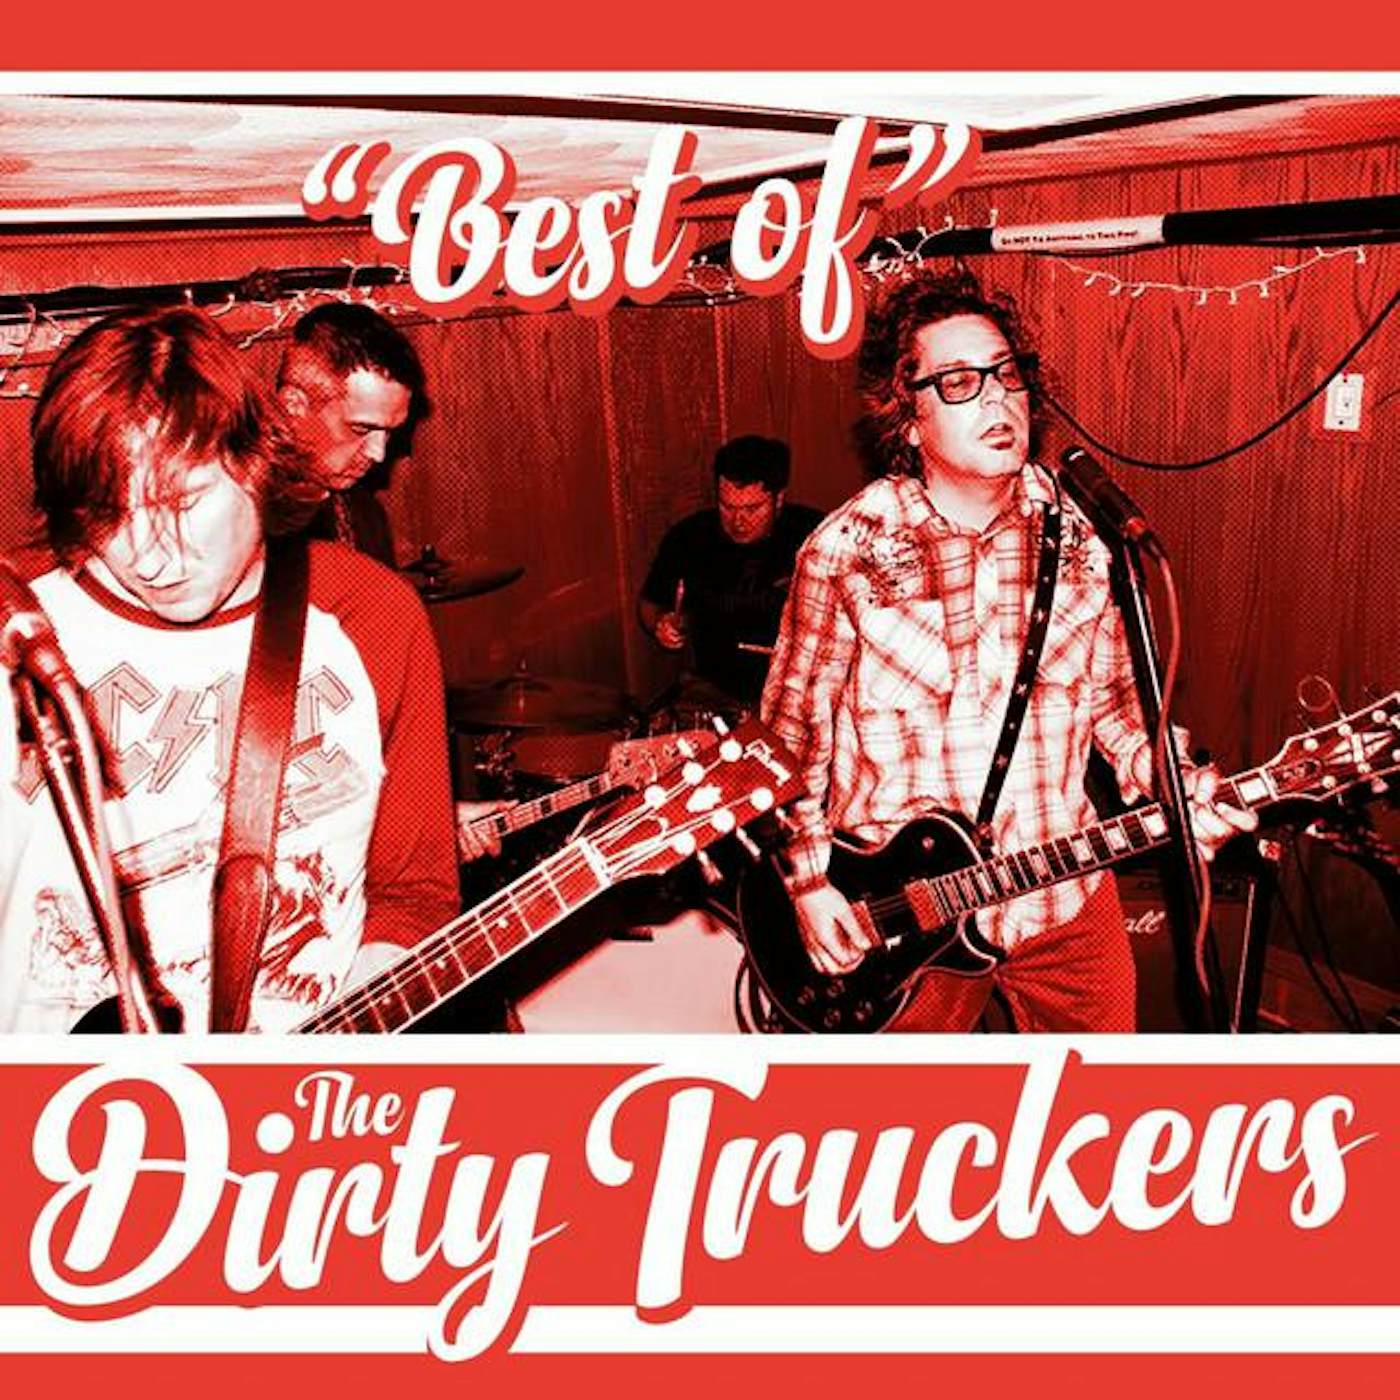 The Dirty Truckers